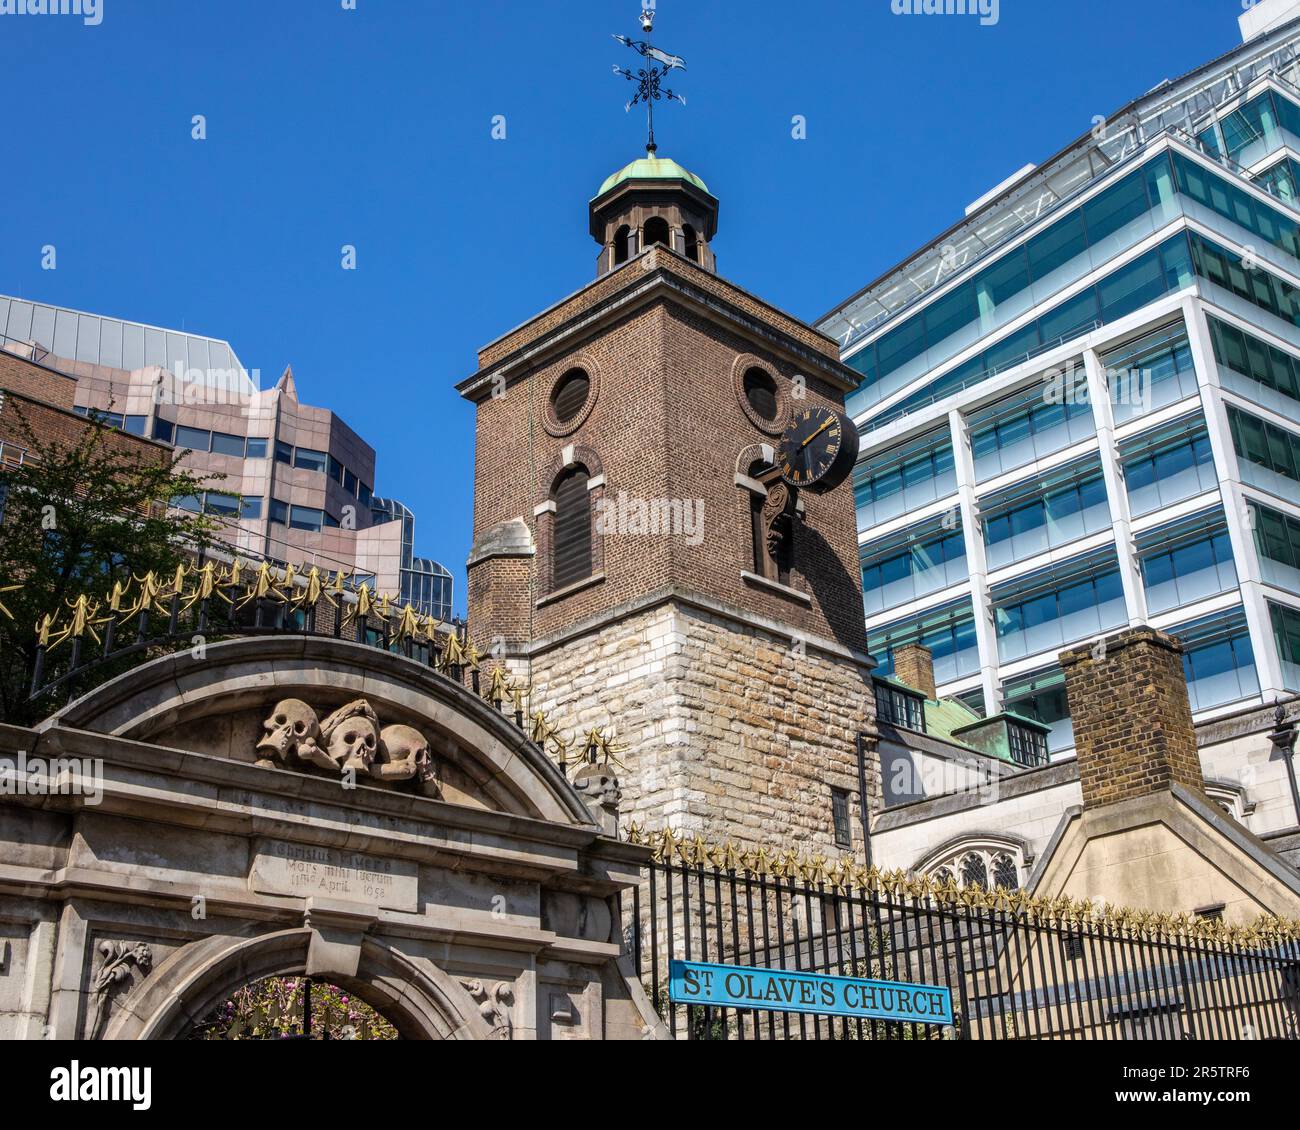 The tower and entrance gateway of the historic St. Olaves Church, located on Hart Street in the city of London, UK. Stock Photo